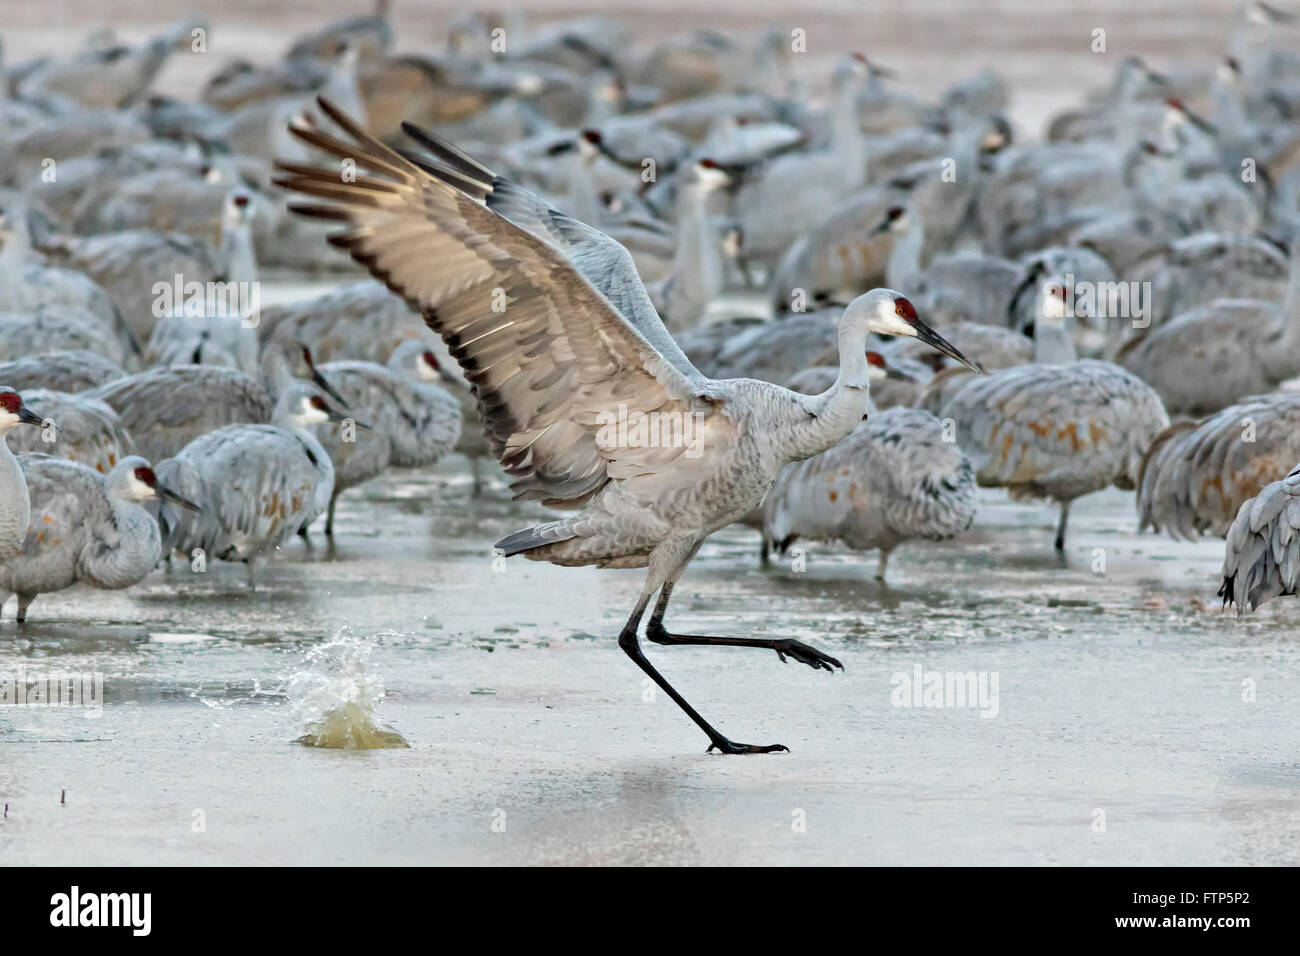 Sandhill Cranes slide across the frozen marsh as they struggle to fly off to the feeding ground after spending the night at the Bosque del Apache National Wildlife Refuge in San Antonio, New Mexico. The cranes freeze in place as night temperatures drop and then free themselves when the sun warms the water. Stock Photo